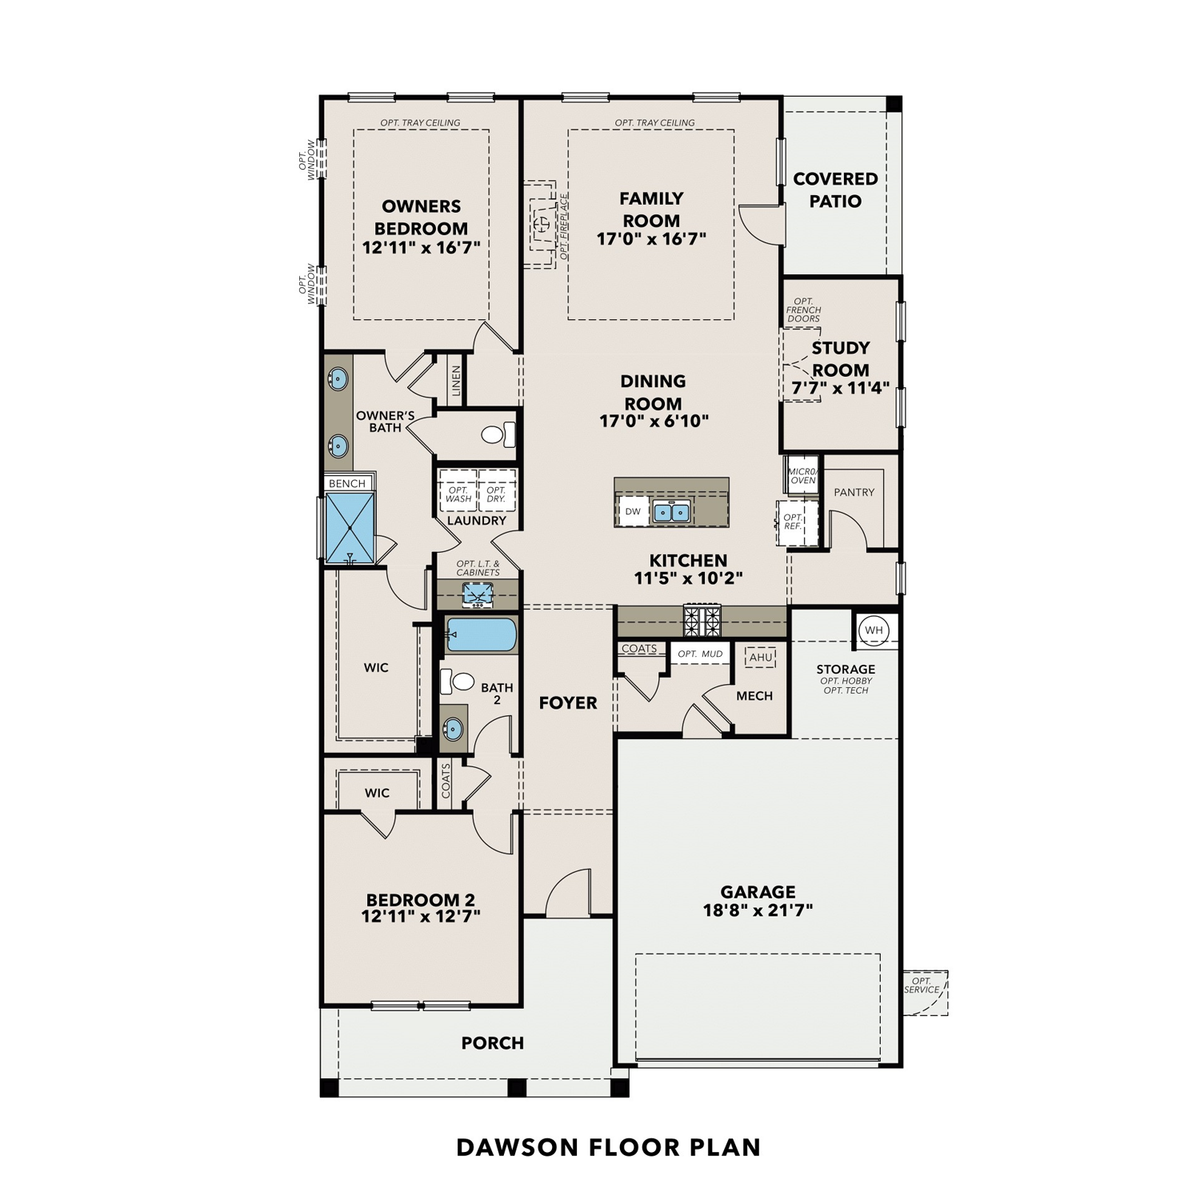 1 - The Dawson A floor plan layout for 1653 Juniper Berry Way in Davidson Homes' Kelly Preserve community.